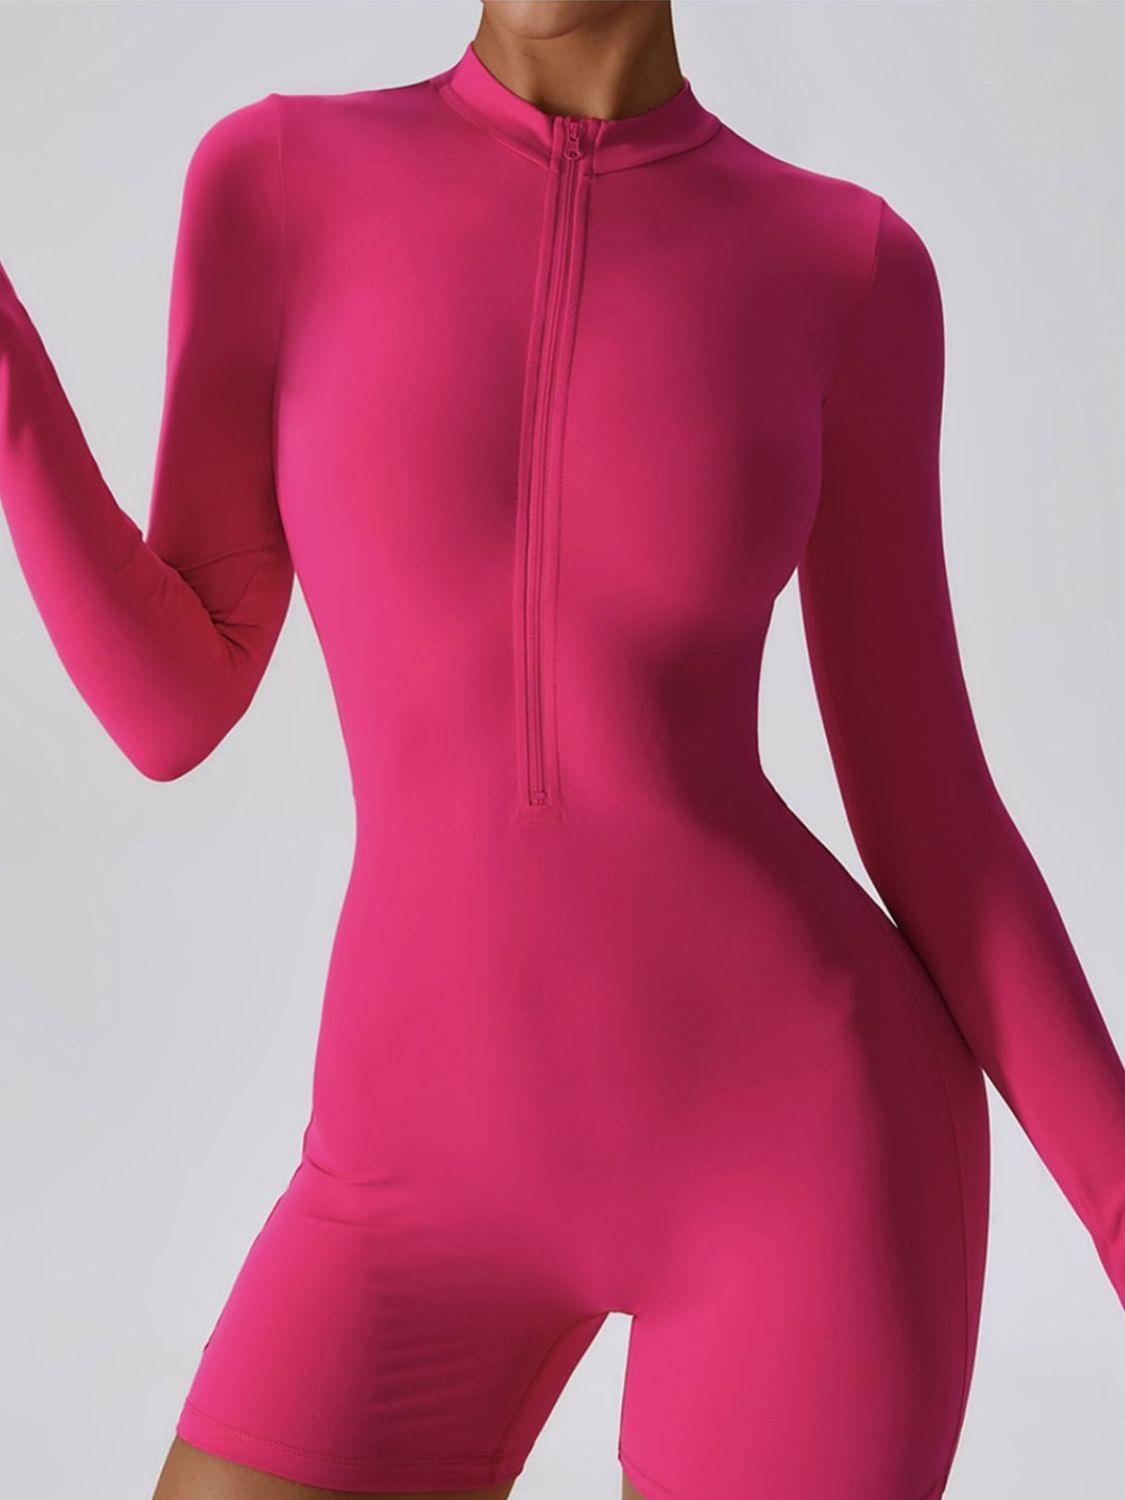 a woman in a pink bodysuit holding a cell phone